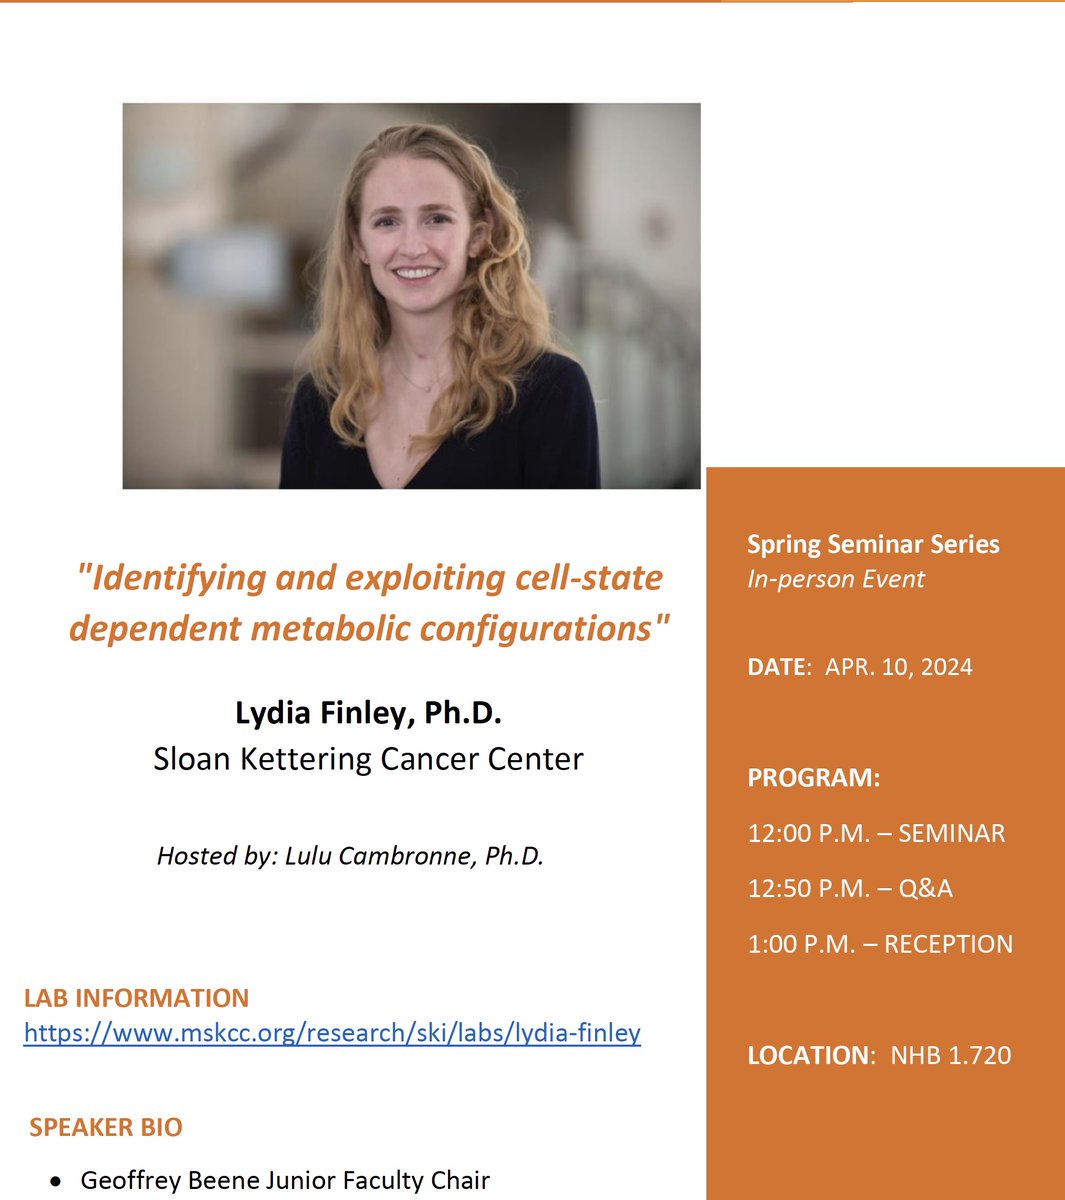 MBS Seminar TODAY at noon- @ut_mbs @TexasScience Dr. Lydia Finley 'Identifying and exploiting cell-state dependent metabolic configurations'